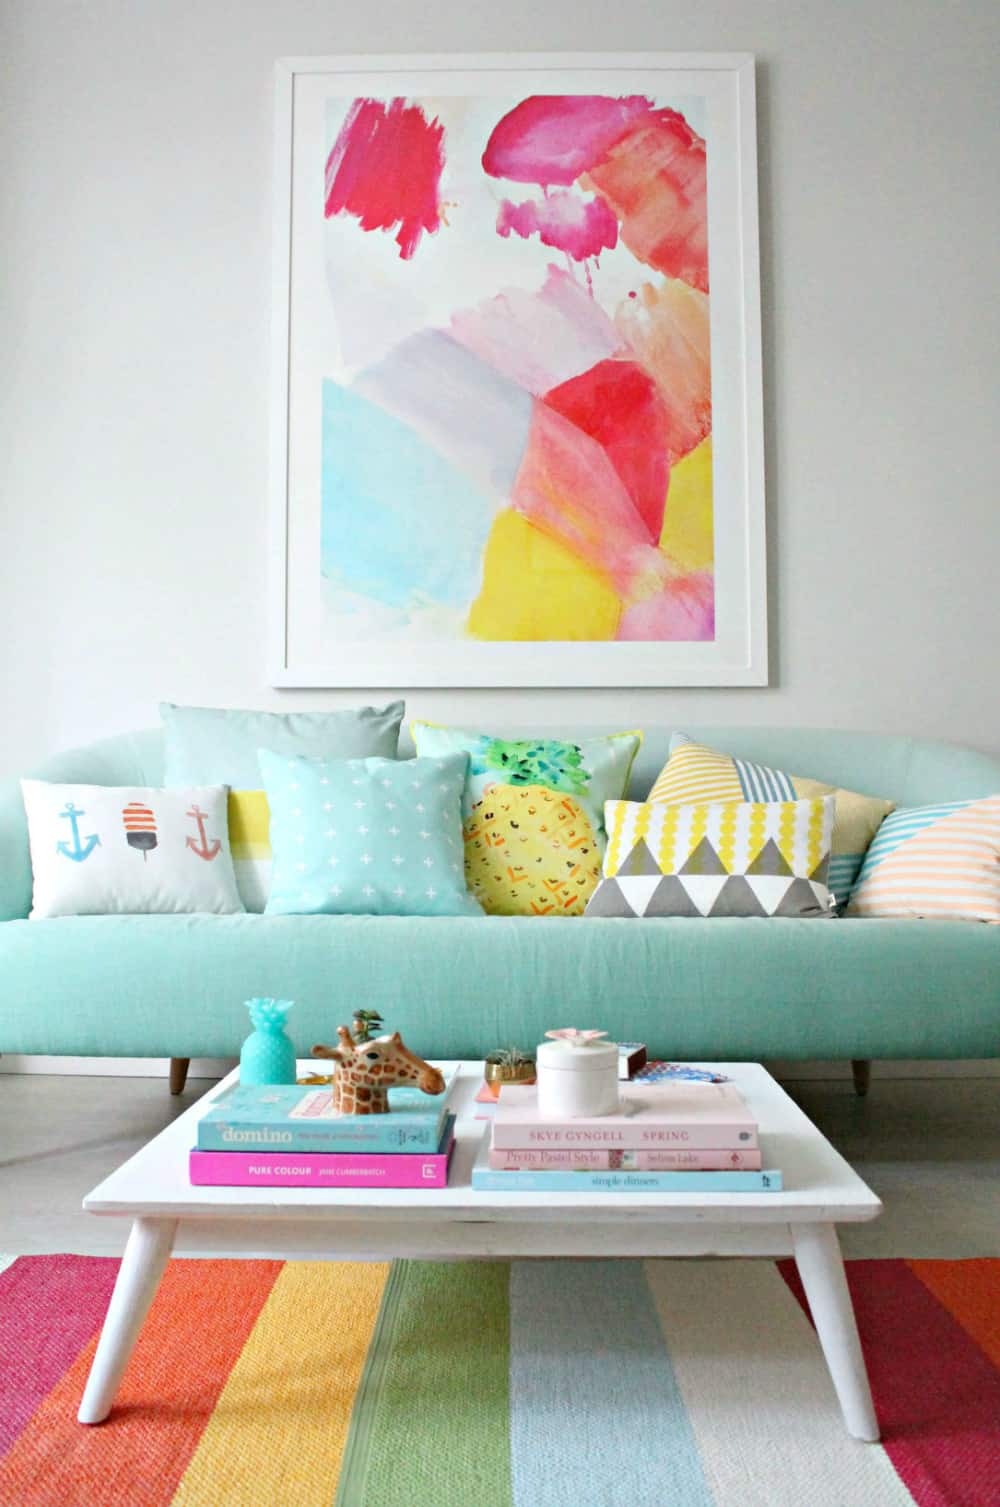 Turn Your Home Into a Candy House With Pastel Colors